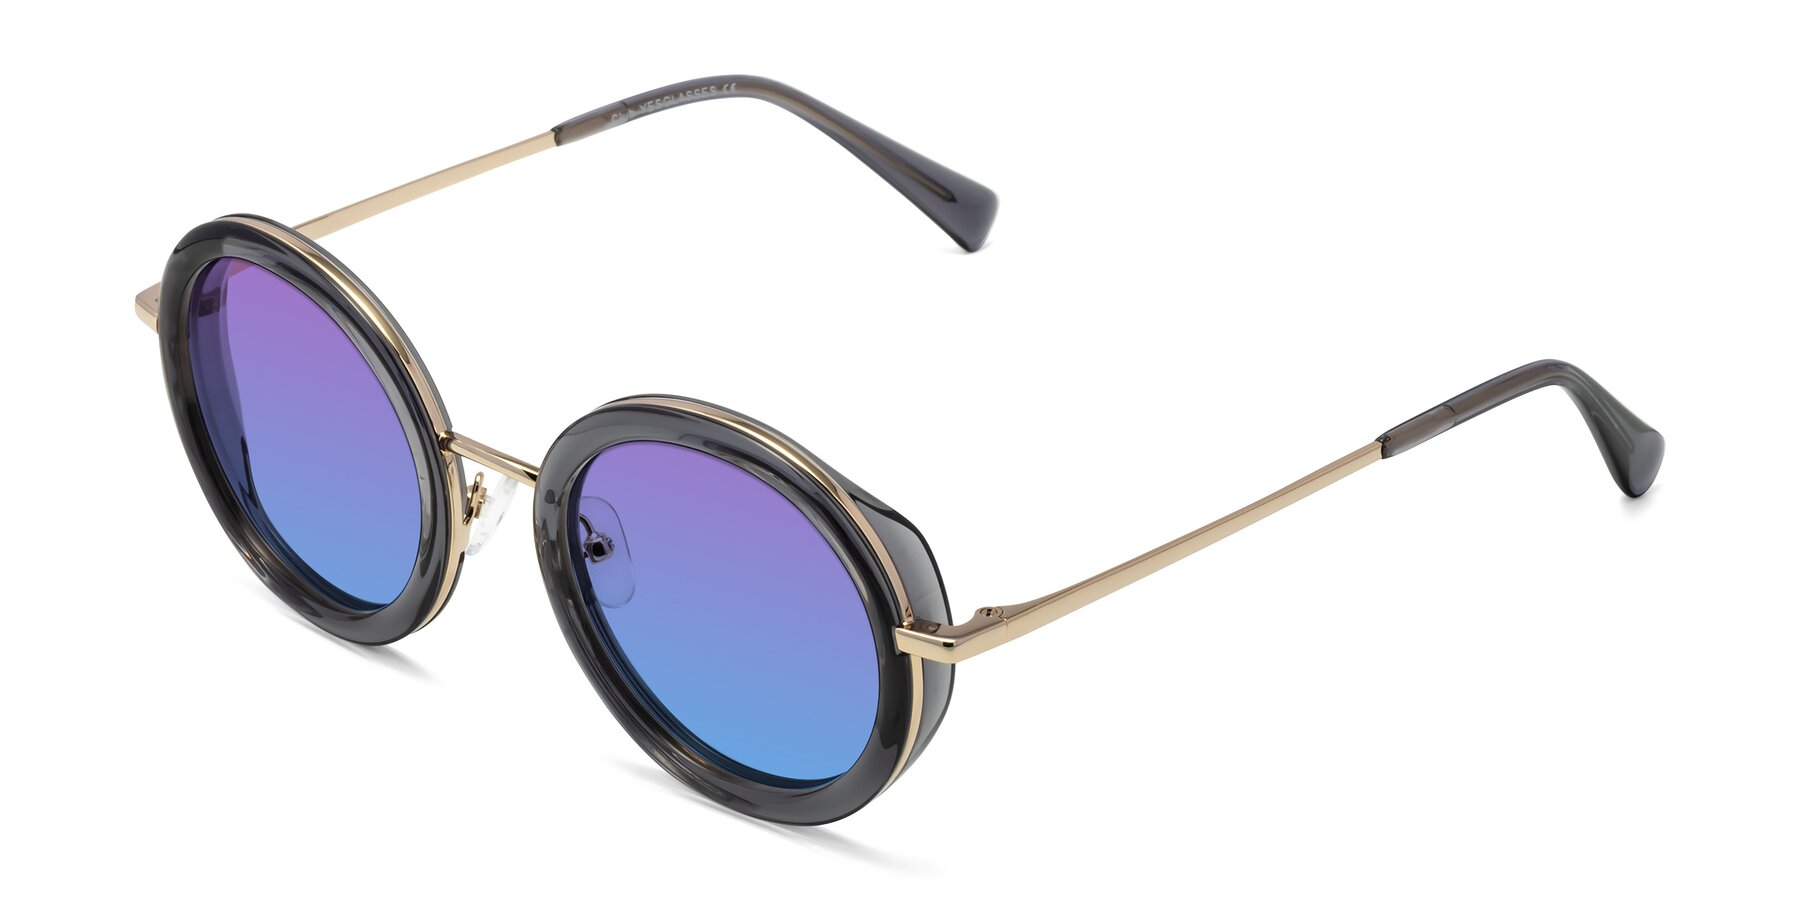 Angle of Club in Gray-Gold with Purple / Blue Gradient Lenses